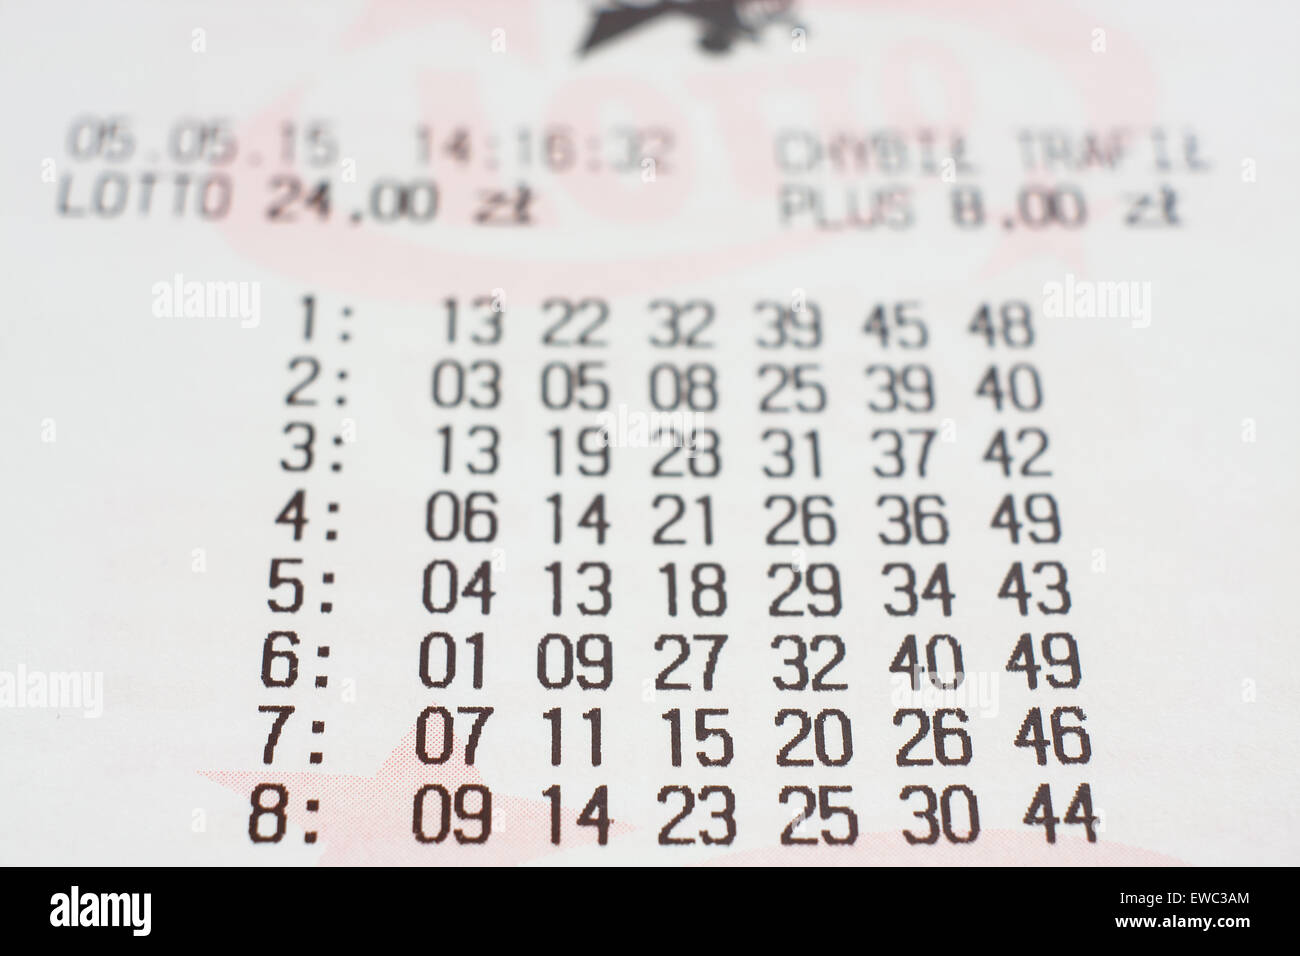 GDANSK, POLAND - MAY 05, 2015. Polish lotto ticket with numbers Stock Photo